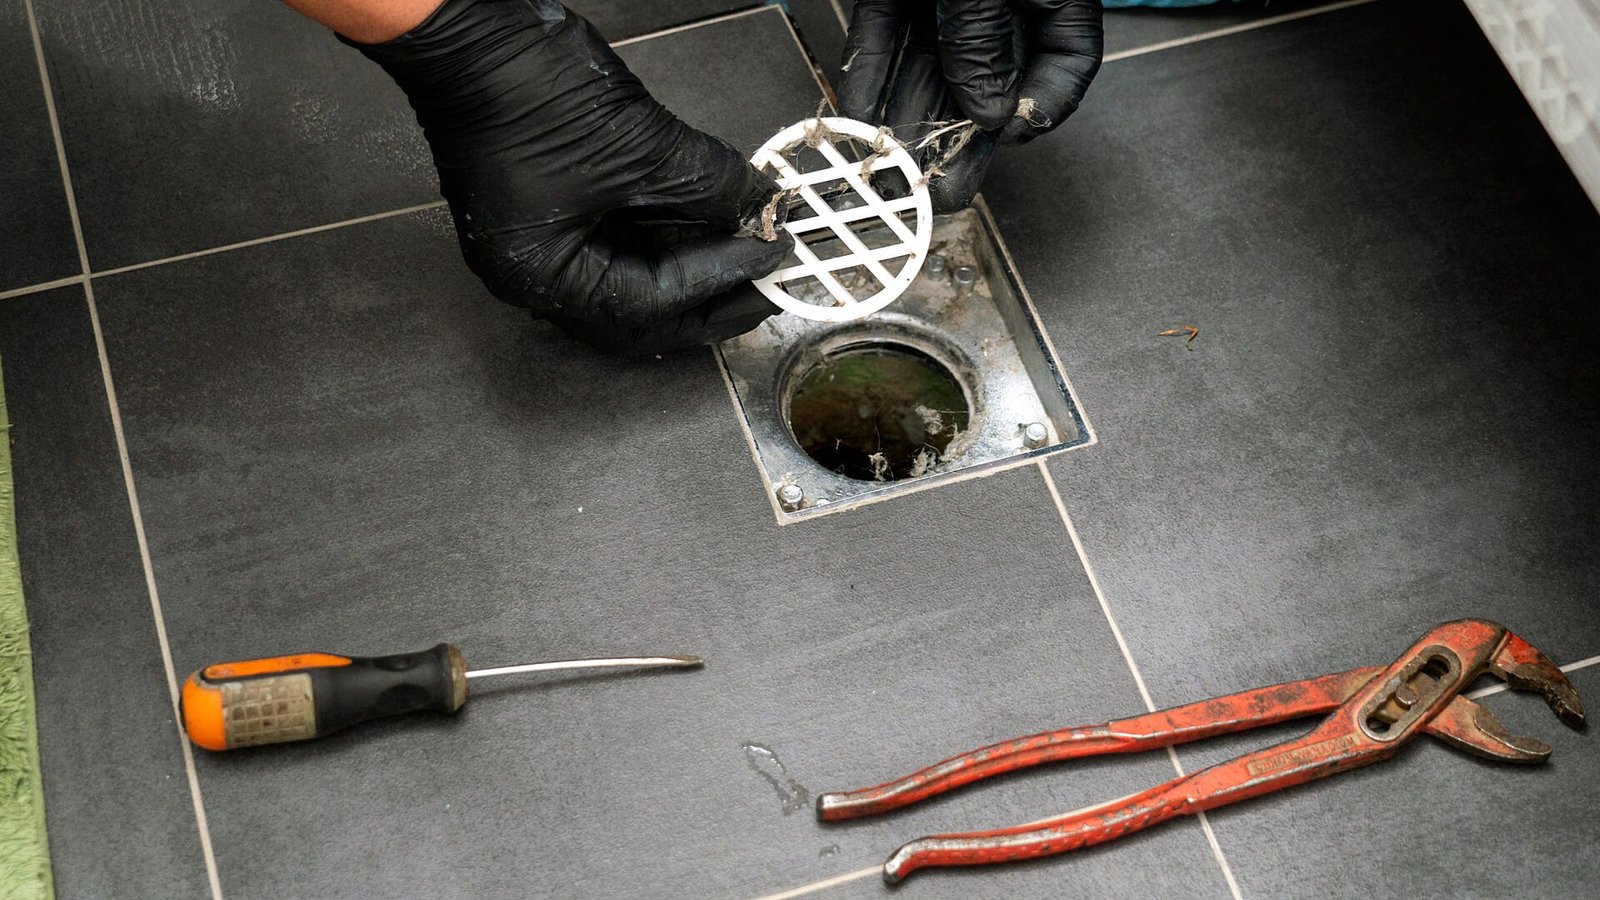 Shower drain clogged Cleaning service in Brisbane